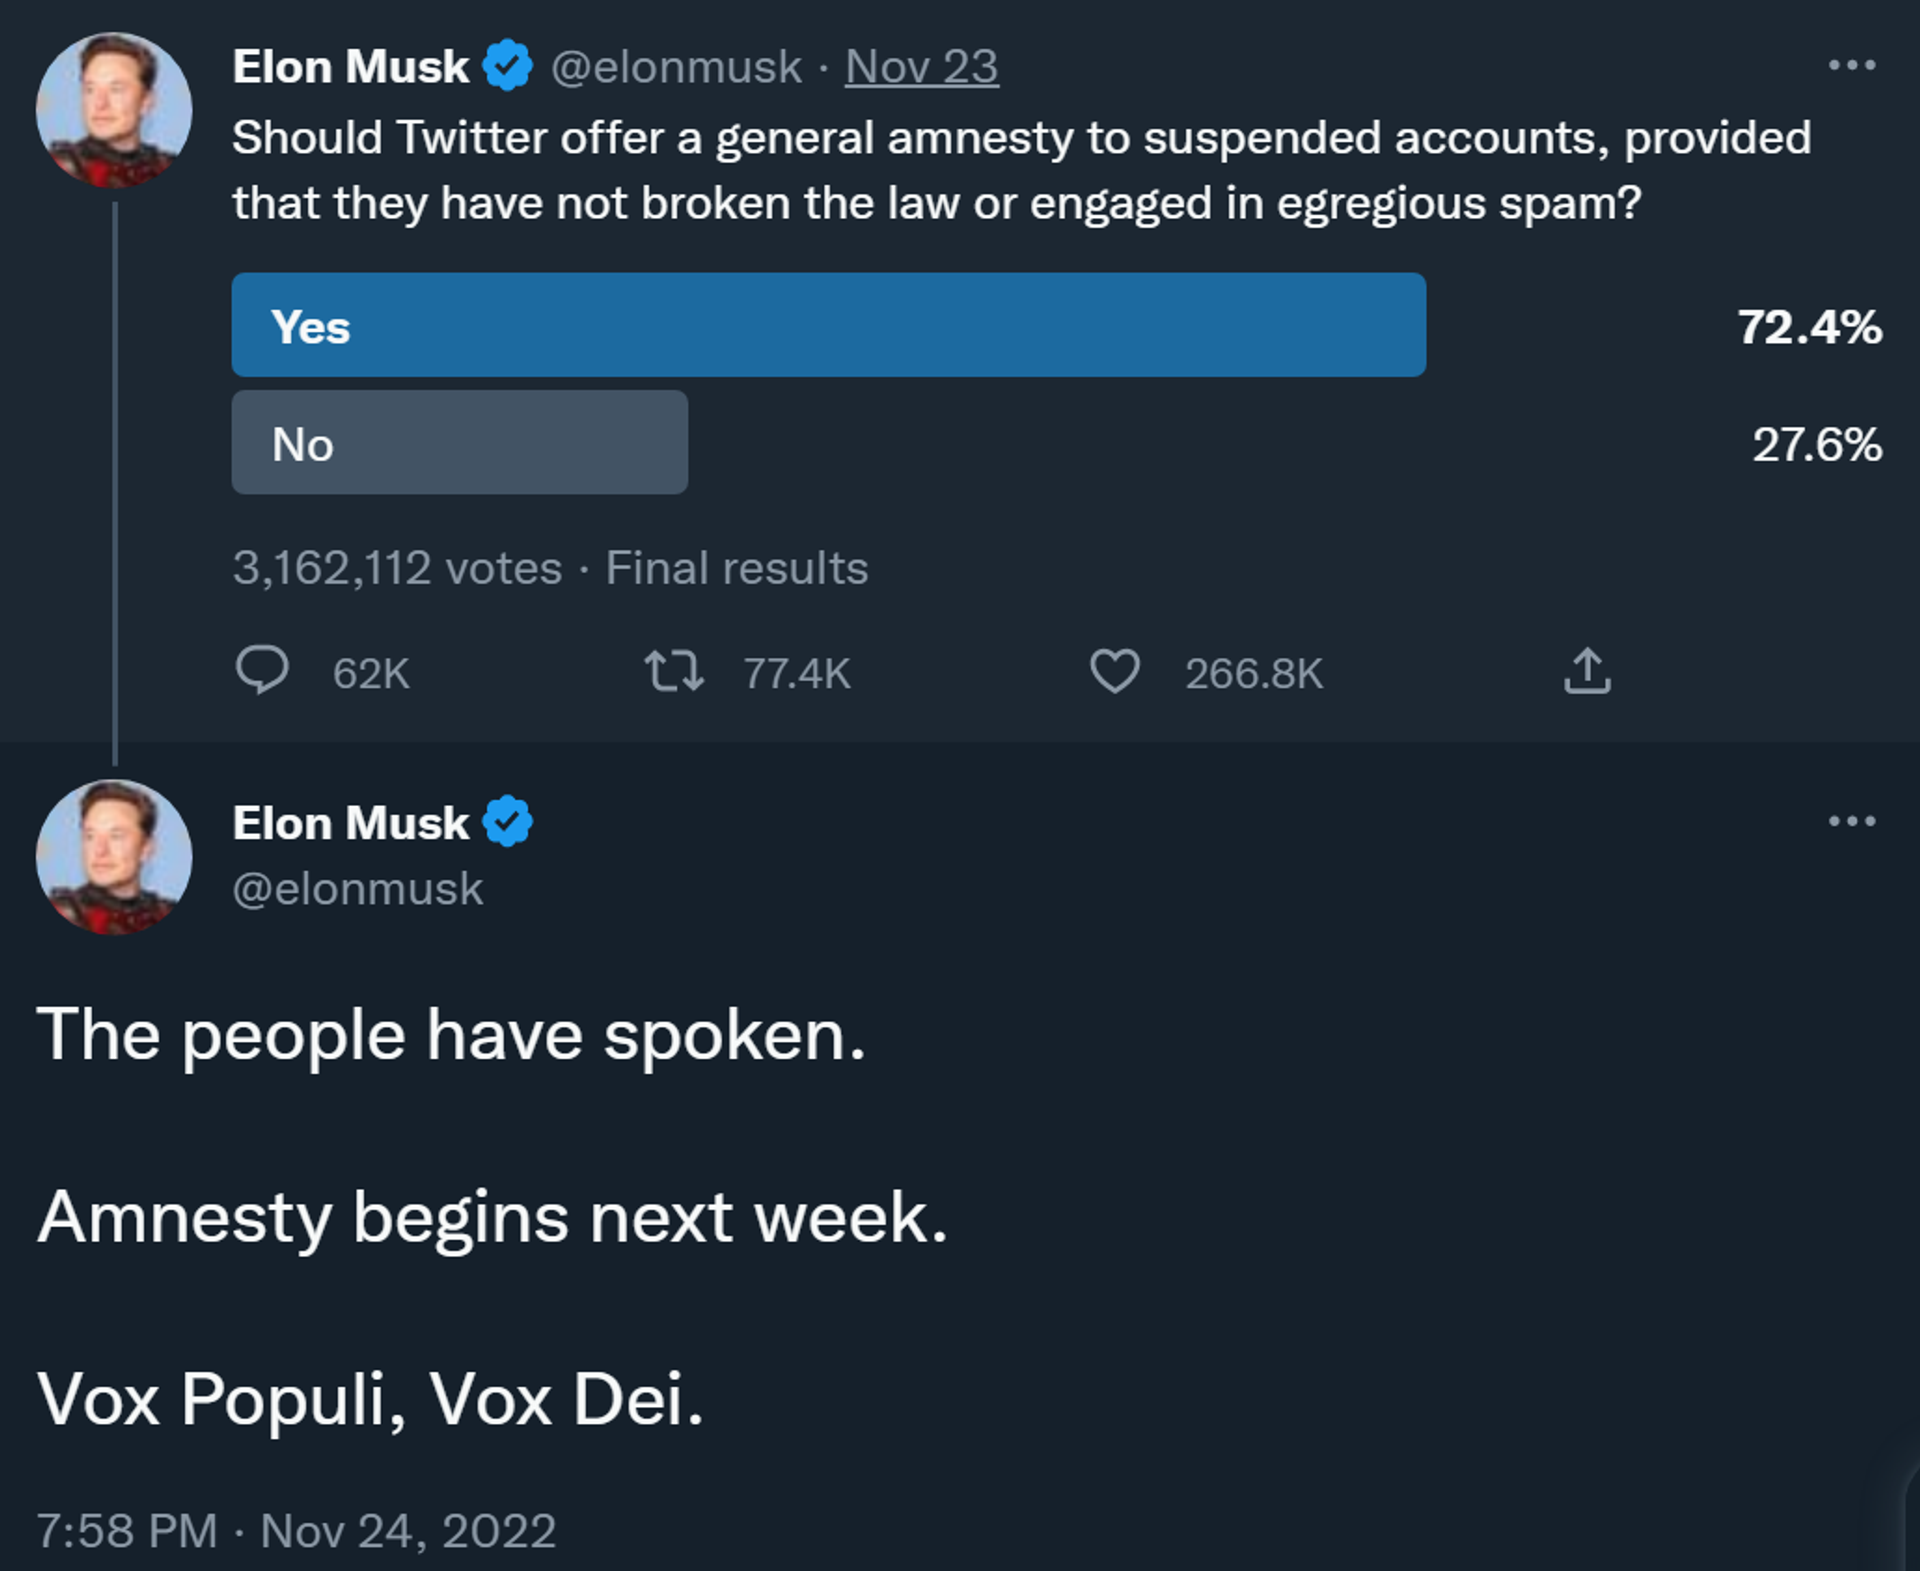 New Twitter owner Elon Musk pledges an amnesty for suspended accounts after millions of users voted in favour in his online straw poll - Sputnik International, 1920, 02.12.2022